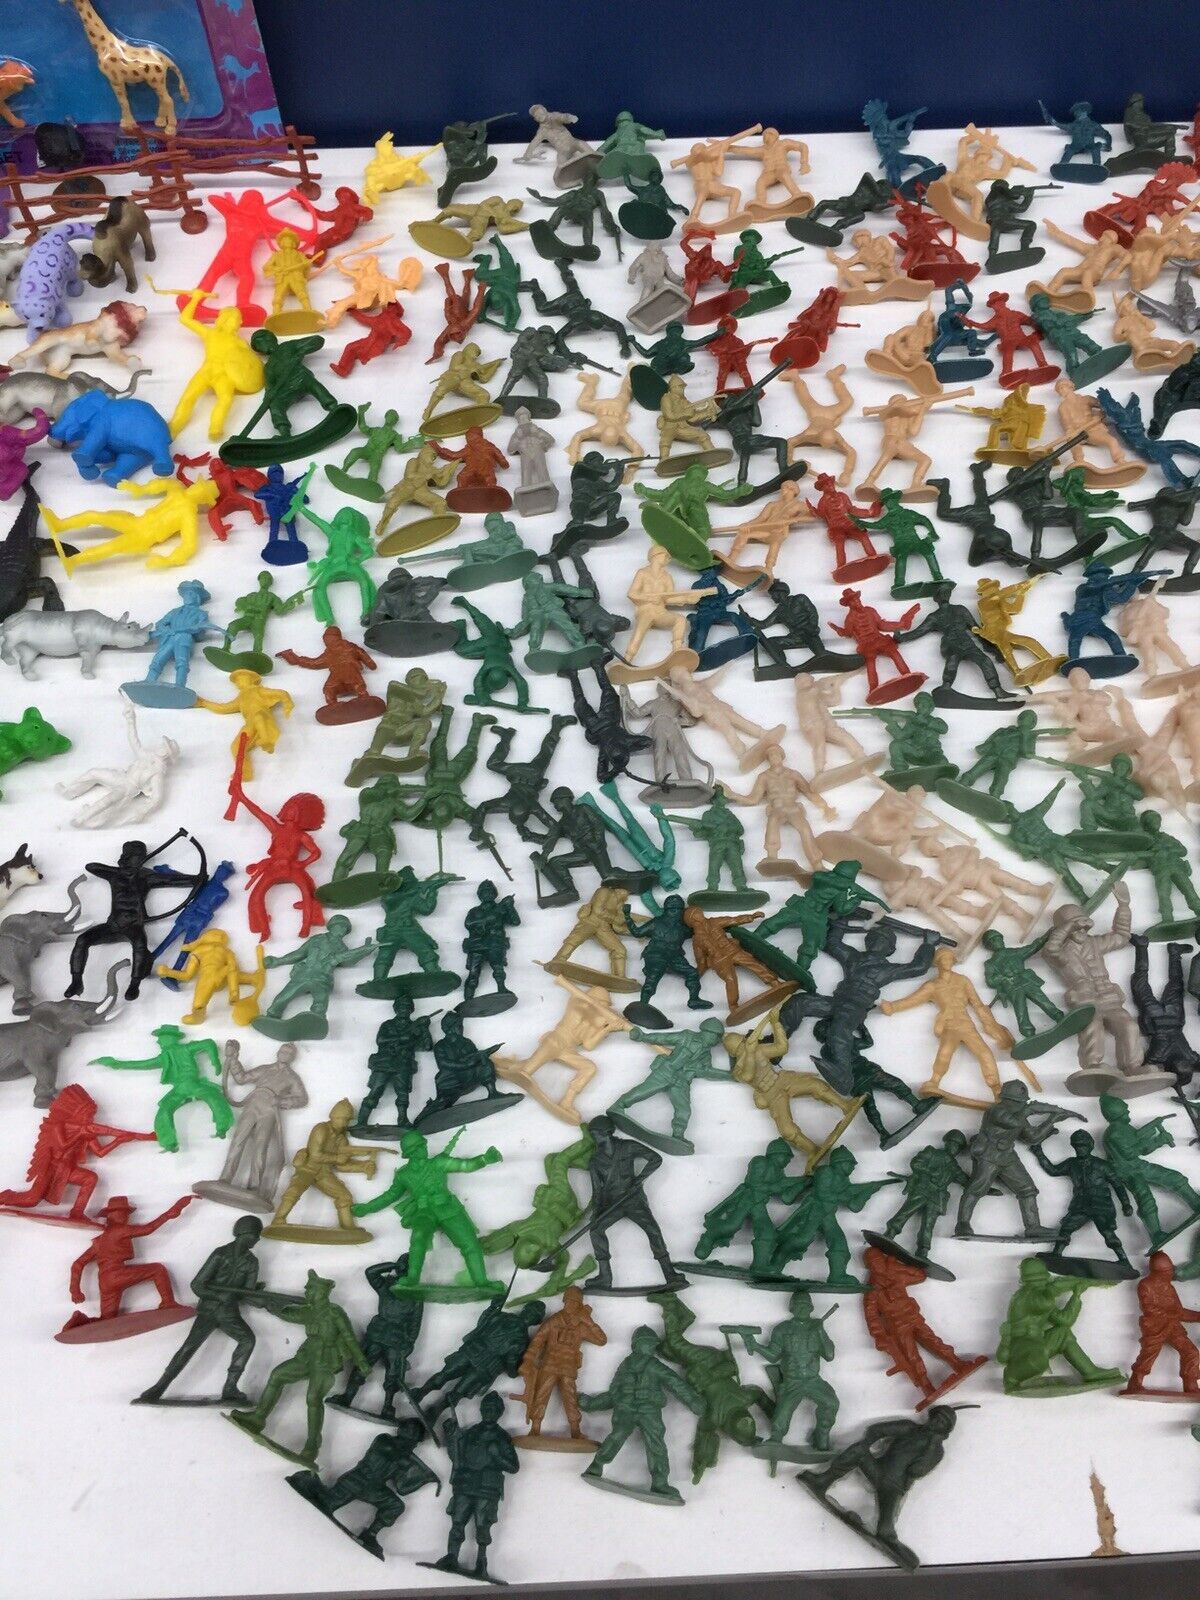 10 Pounds Toy Lot Plastic Animals Army Men Cowboys Horse Pig Tiger Bear Zoo Cow - Warehouse Toys